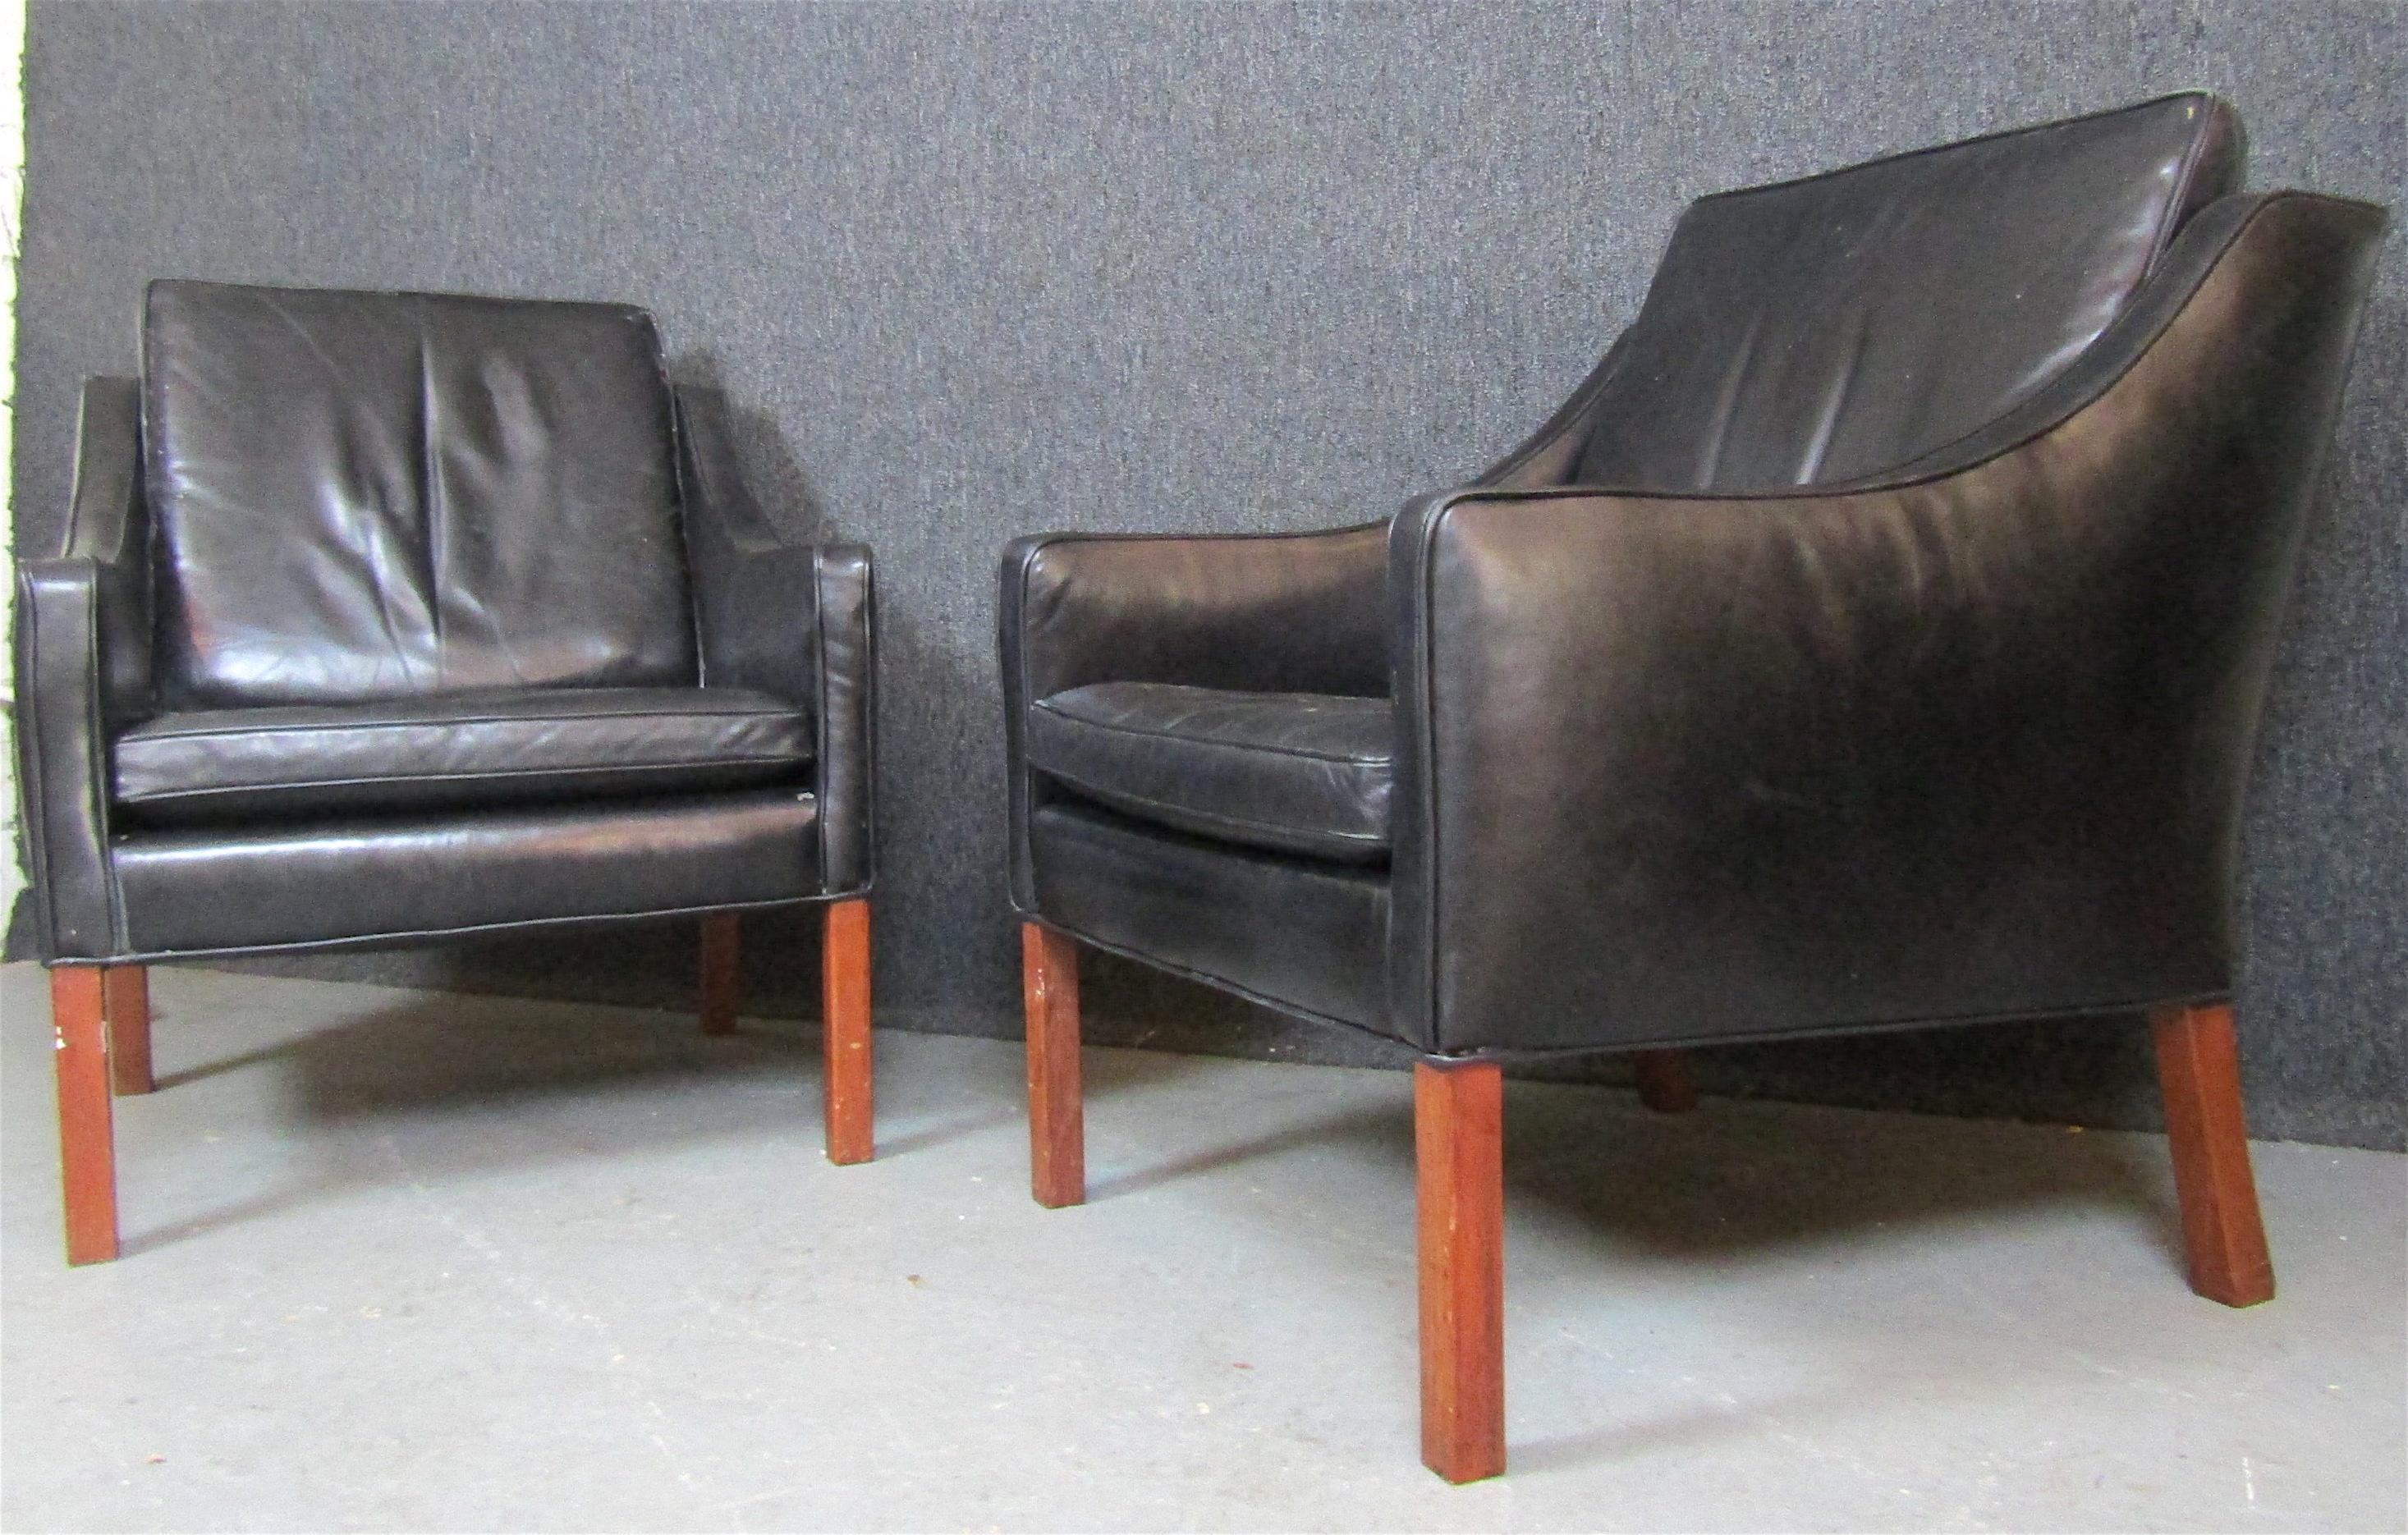 Mid-century modern leather lounge chairs by Borge Mogensen. Timeless Danish design for your modern home or office.
Please confirm location NY or NJ